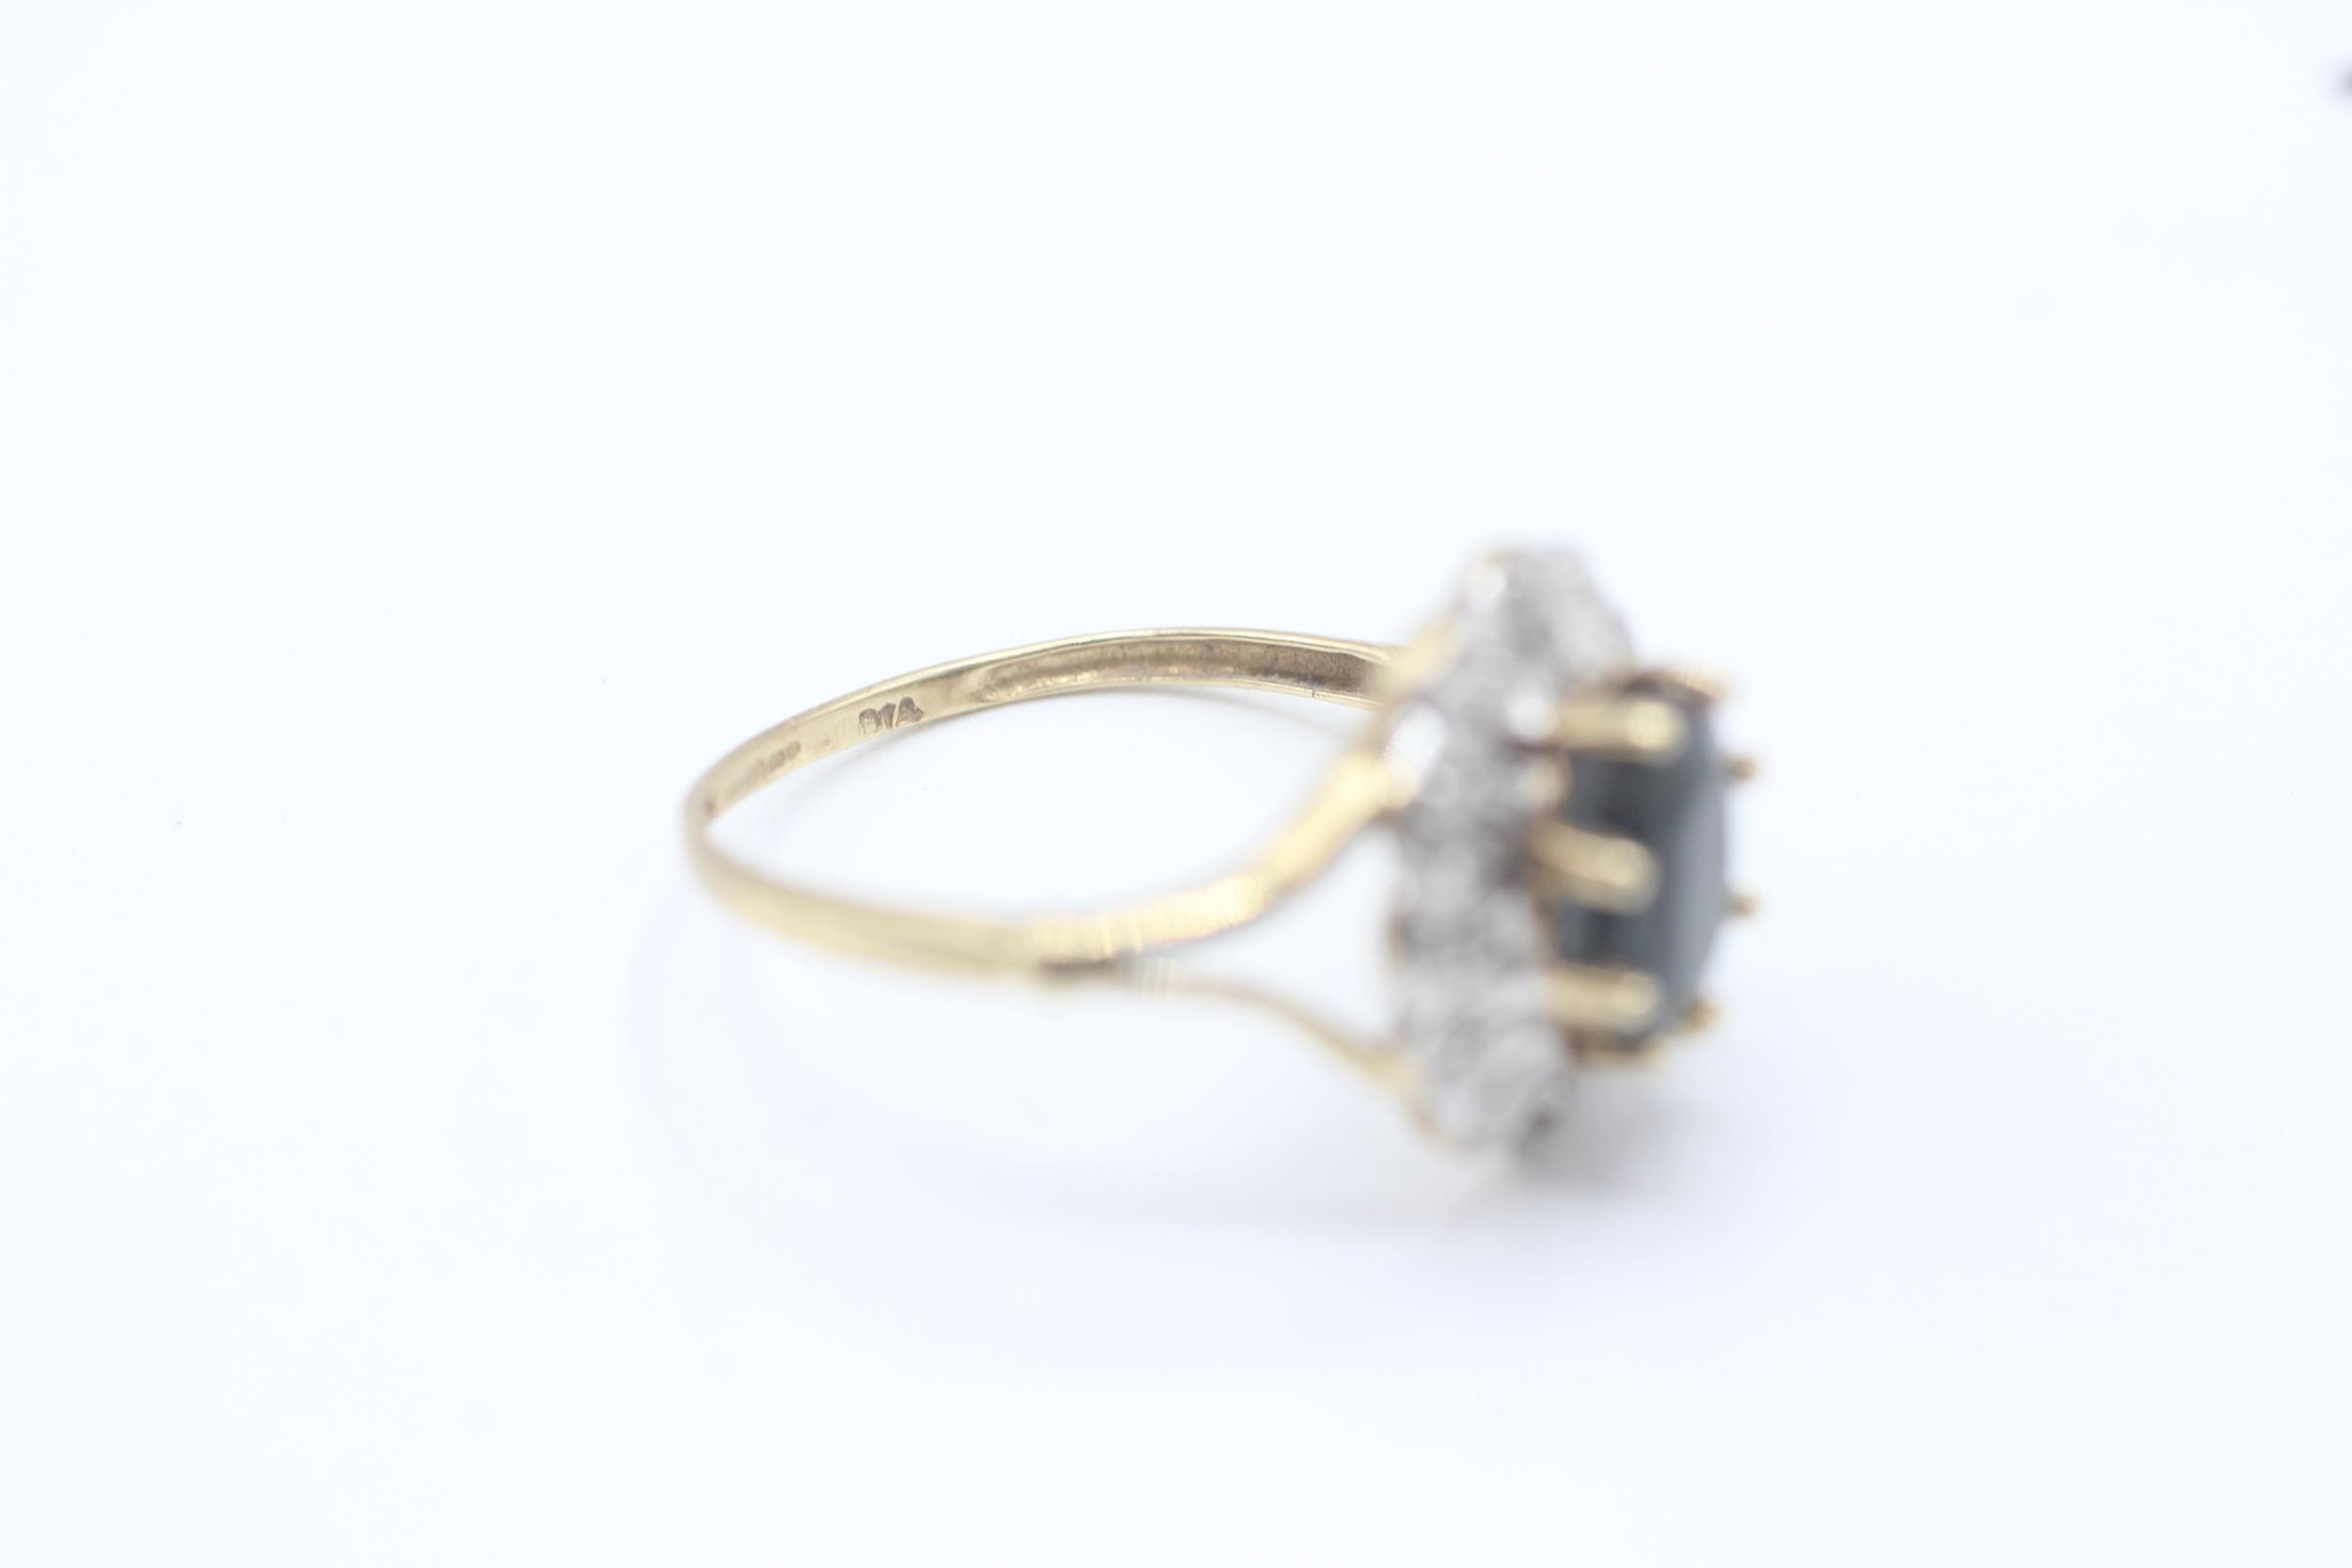 9ct gold sapphire & diamond cluster ring - MISHAPEN - AS SEEN Size O 1.7 g - Image 5 of 5